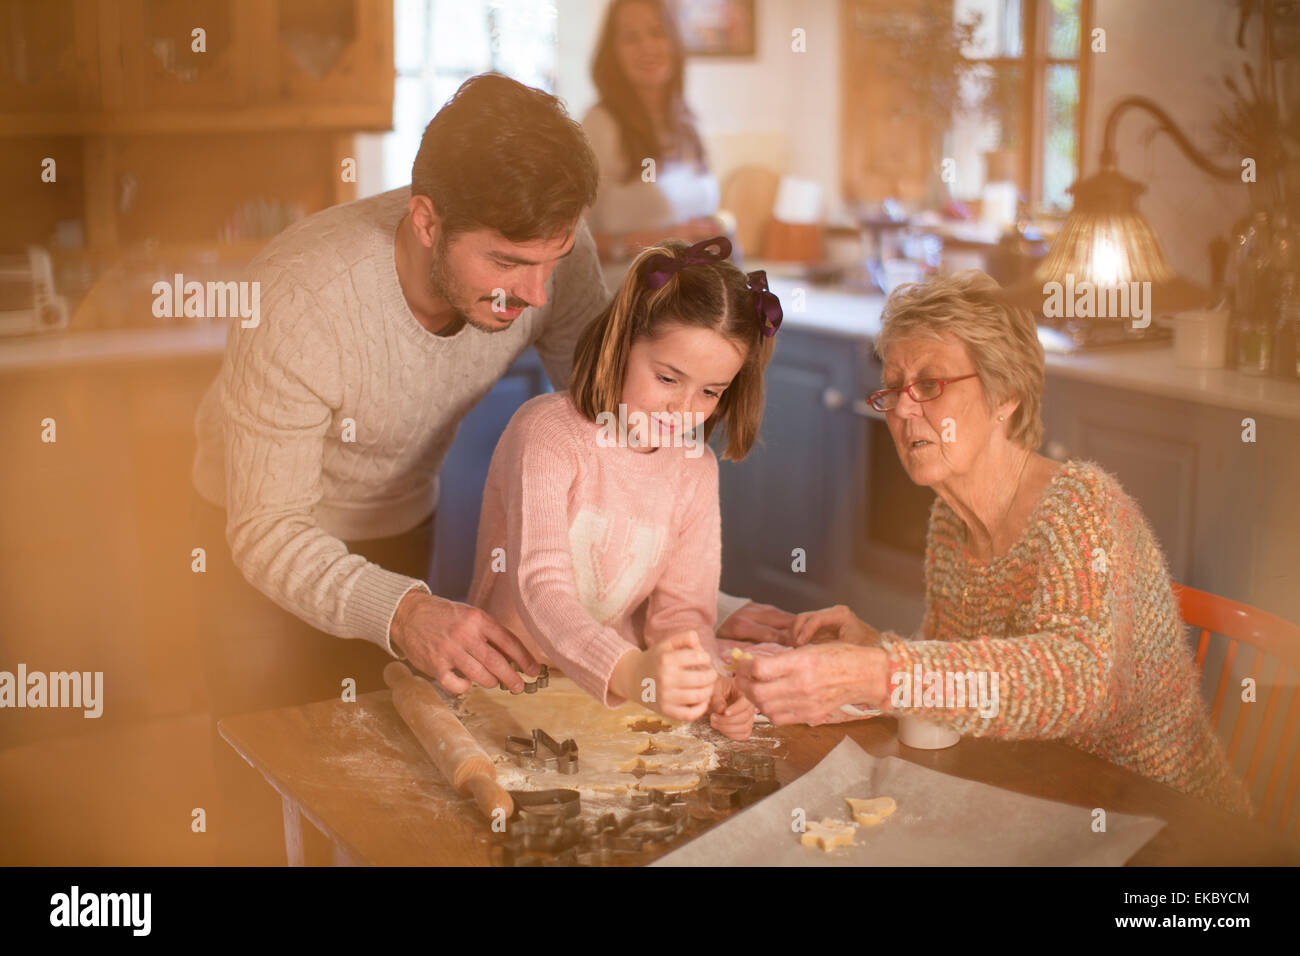 Three generation family cutting shapes in dough to make homemade cookies Stock Photo